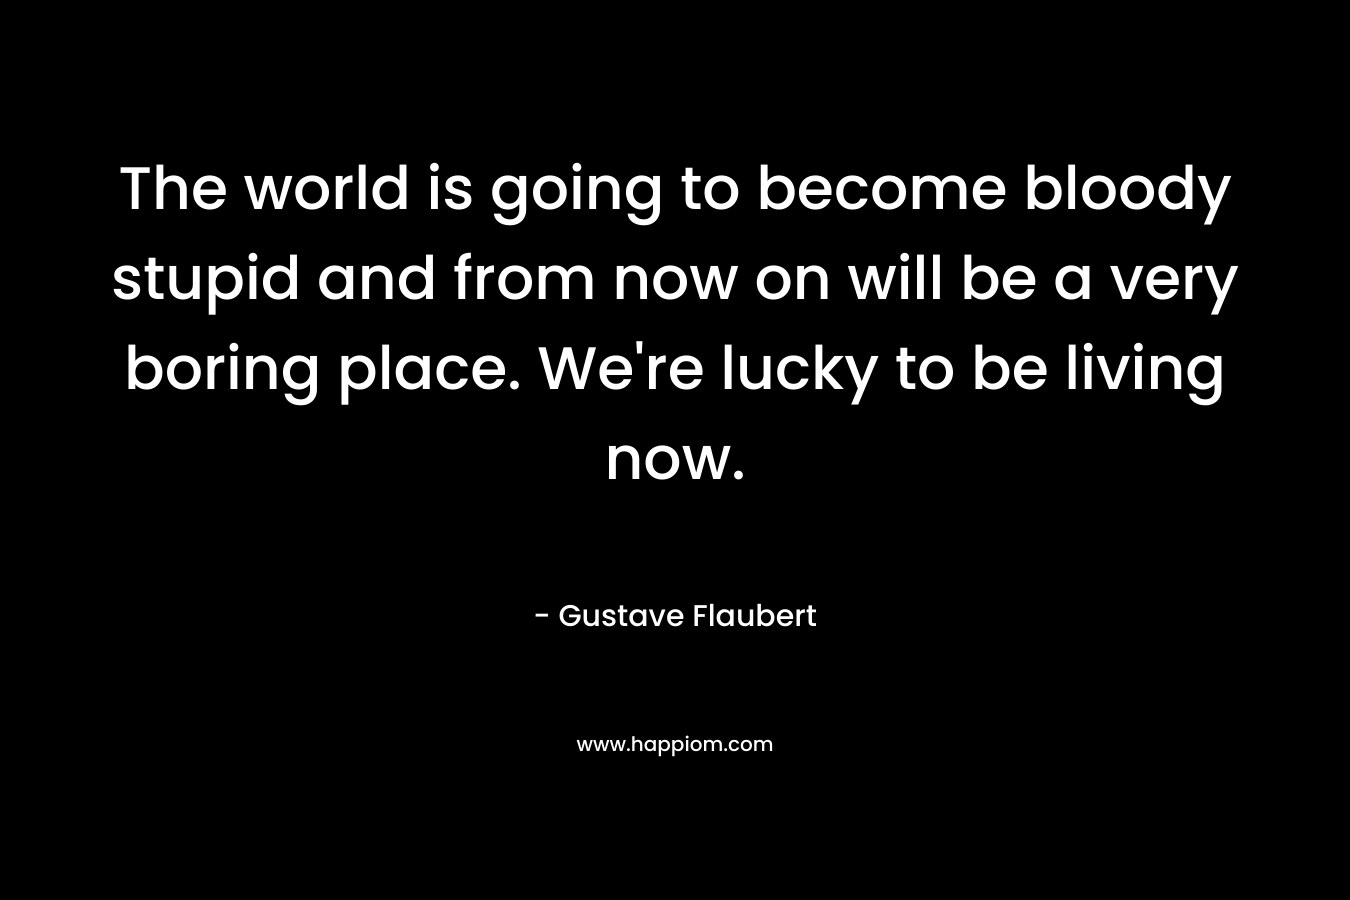 The world is going to become bloody stupid and from now on will be a very boring place. We’re lucky to be living now. – Gustave Flaubert